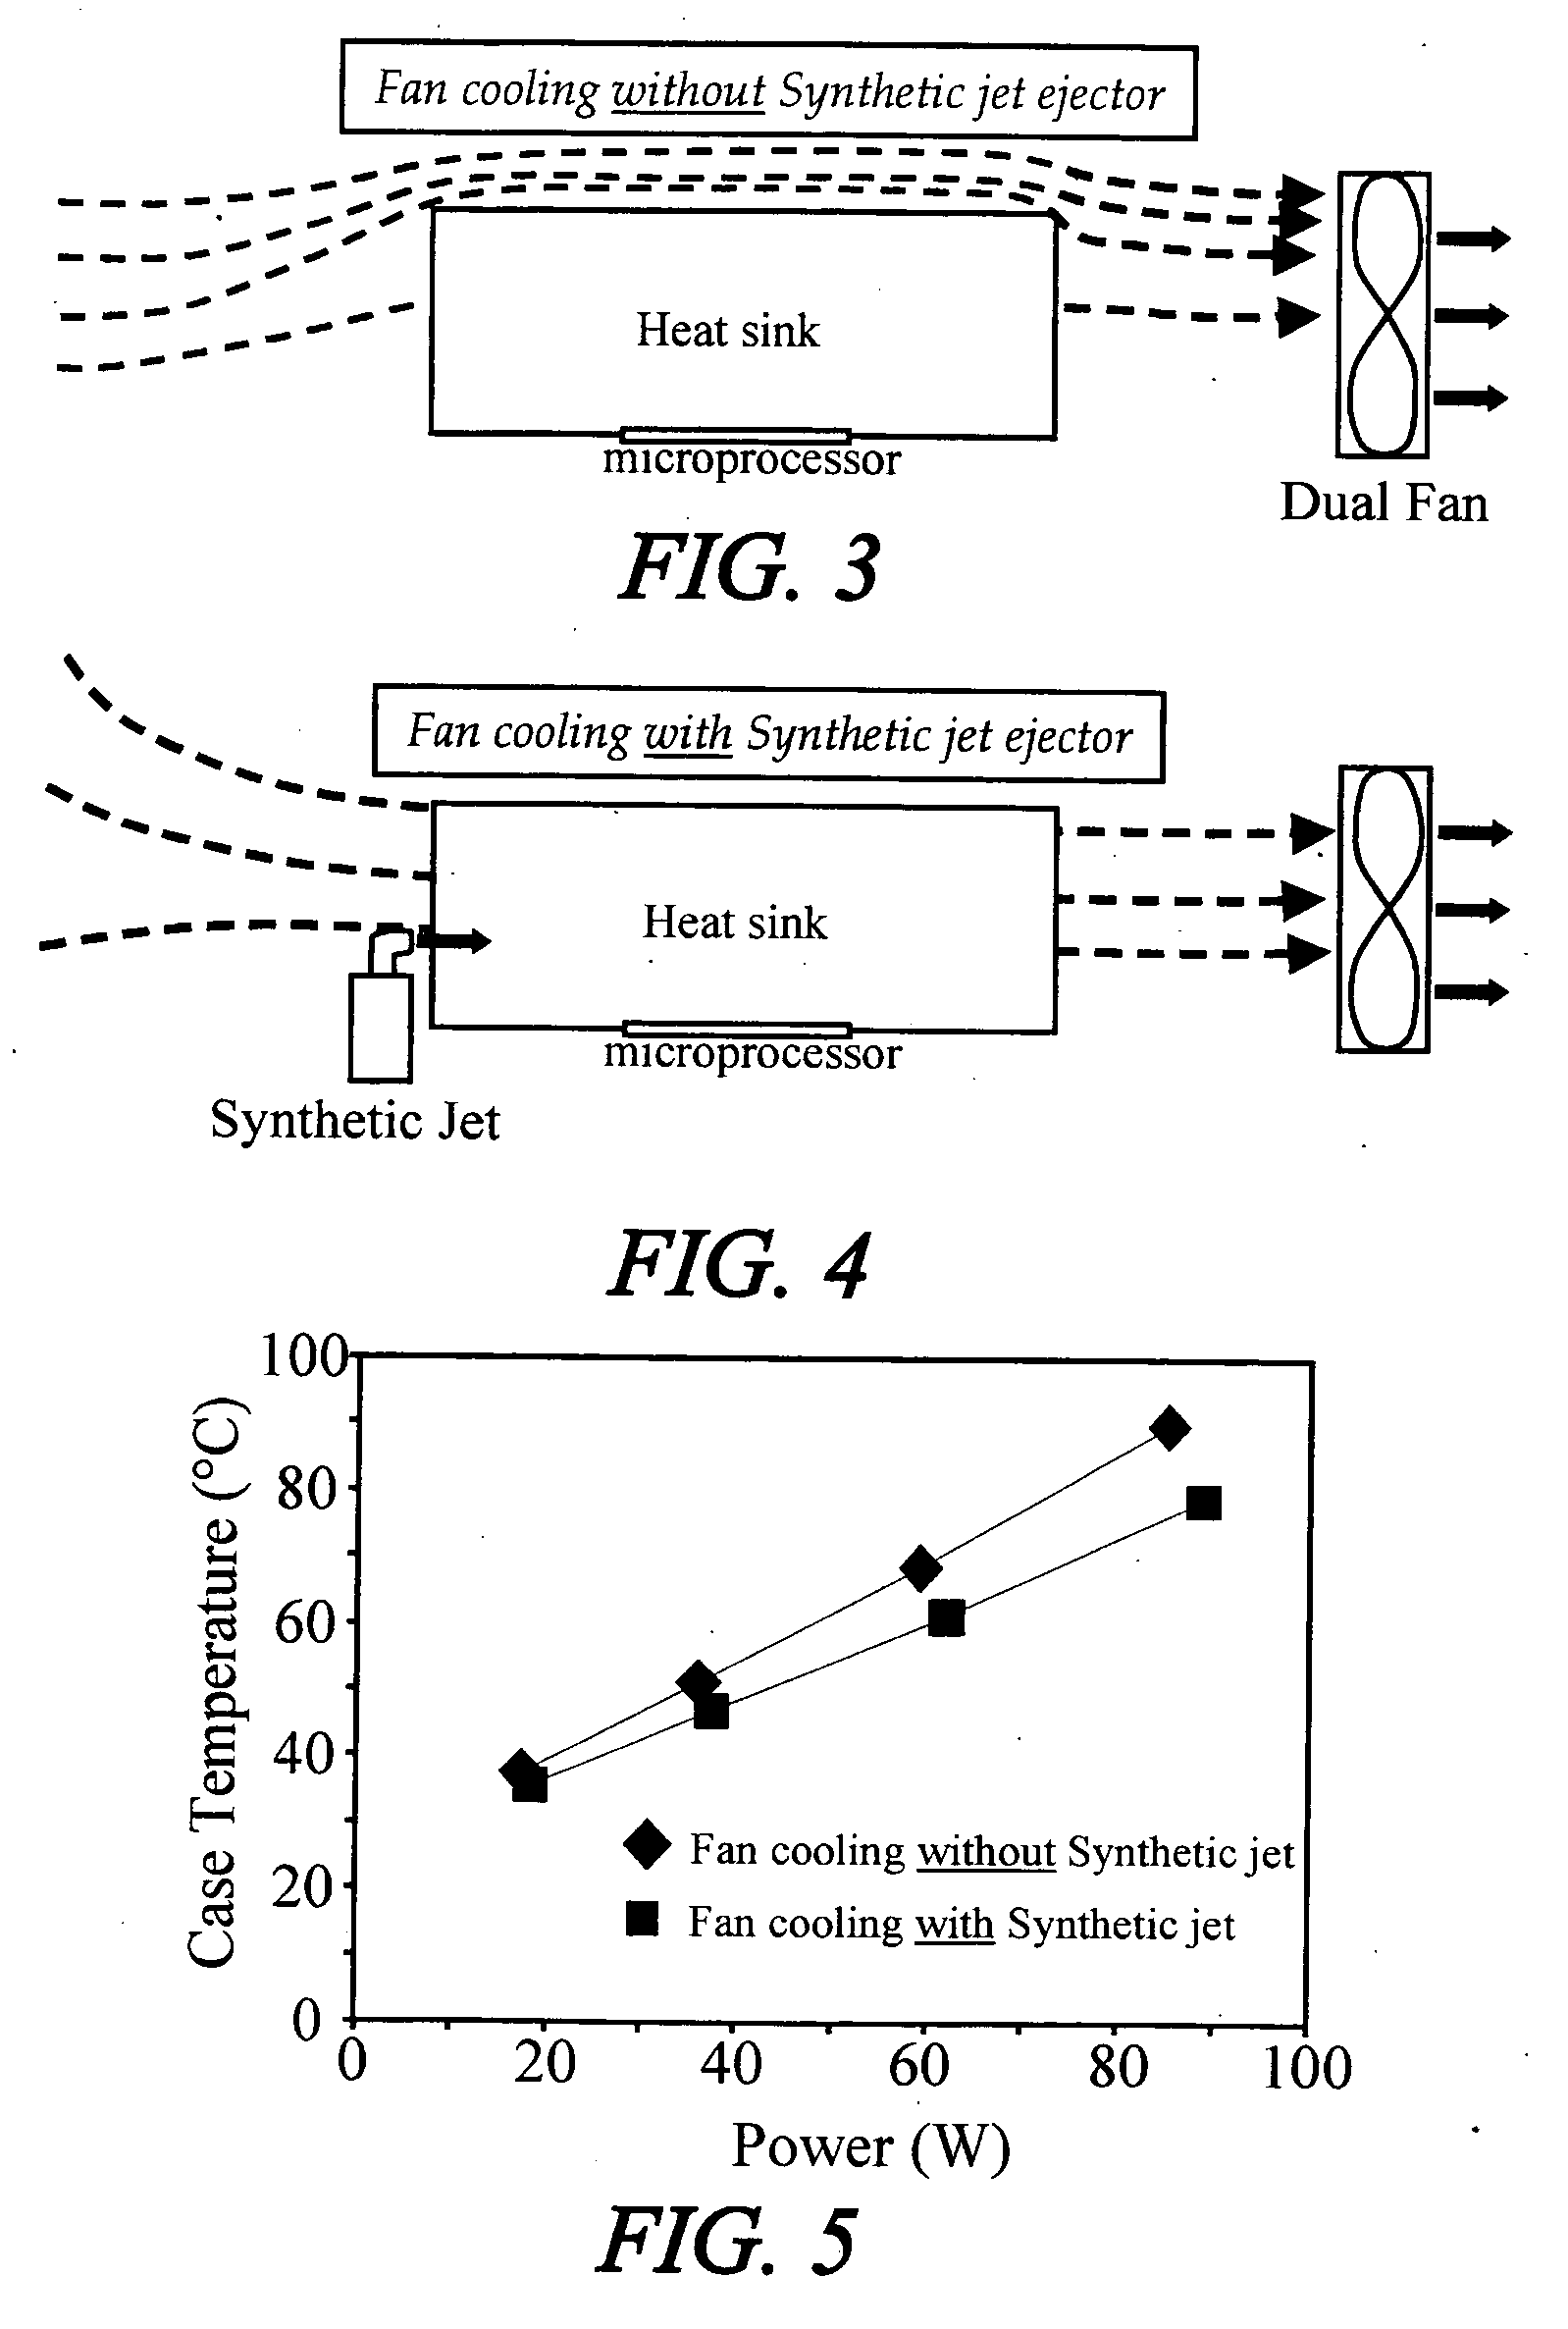 Synthetic jet ejector for the thermal management of PCI cards